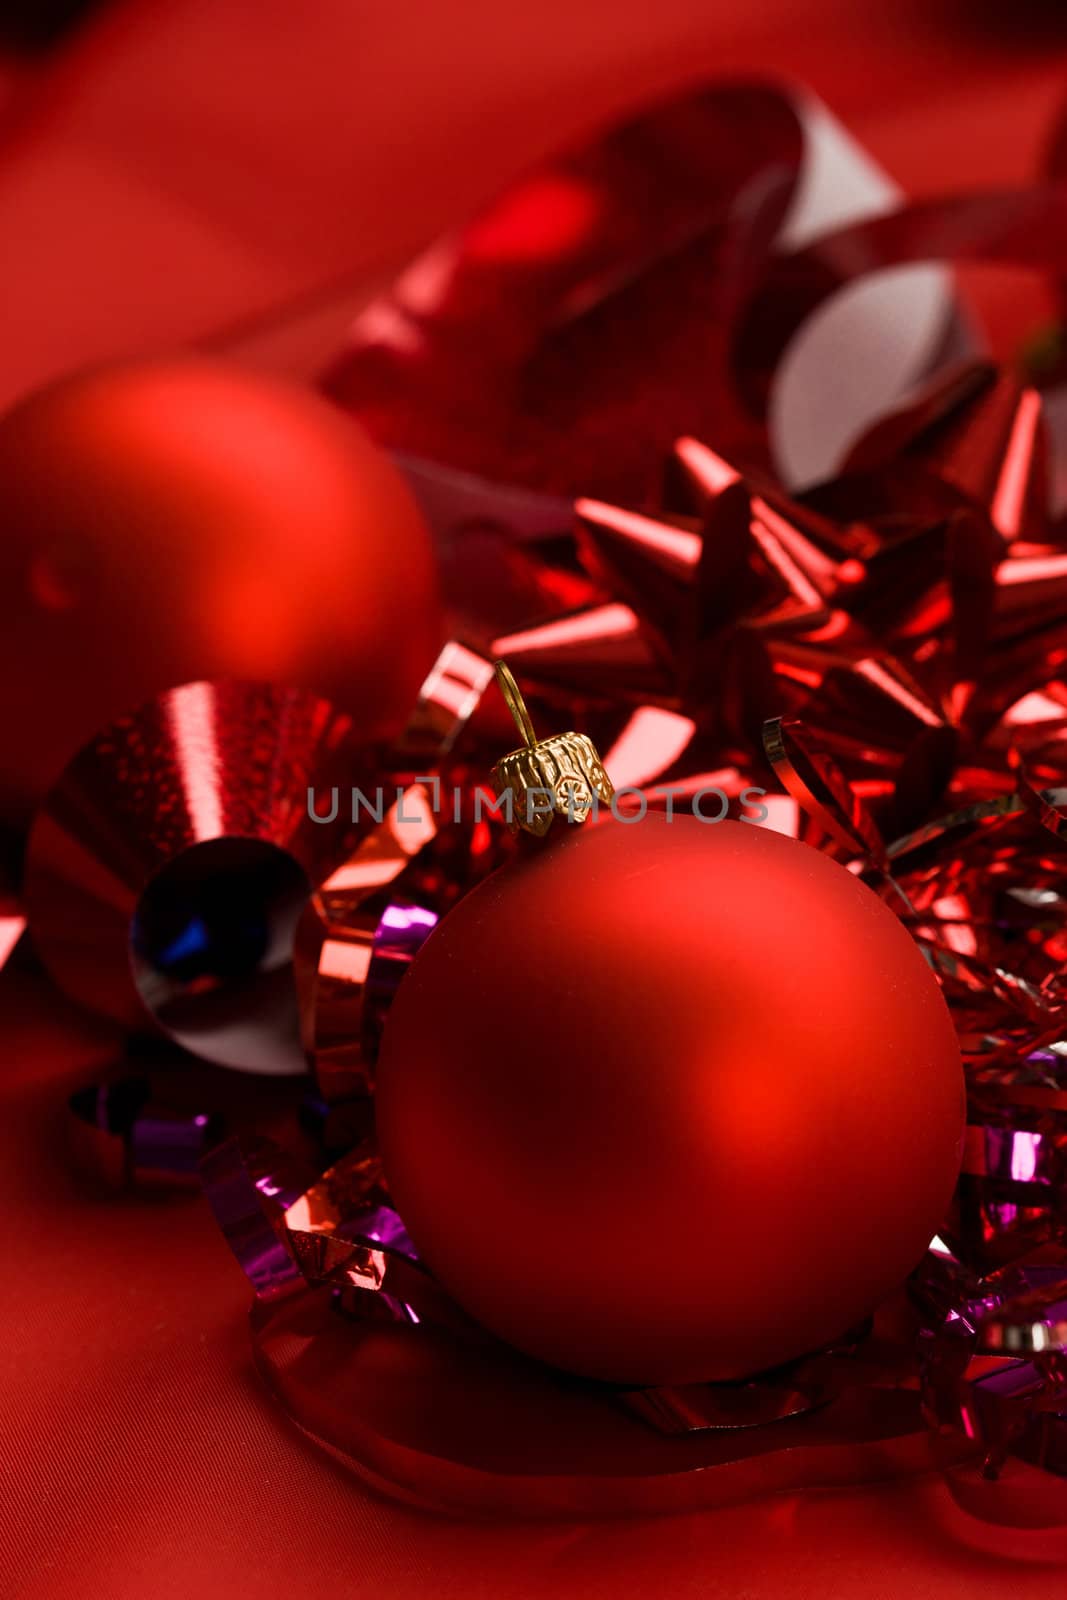 holiday series: some red christms ball over red background